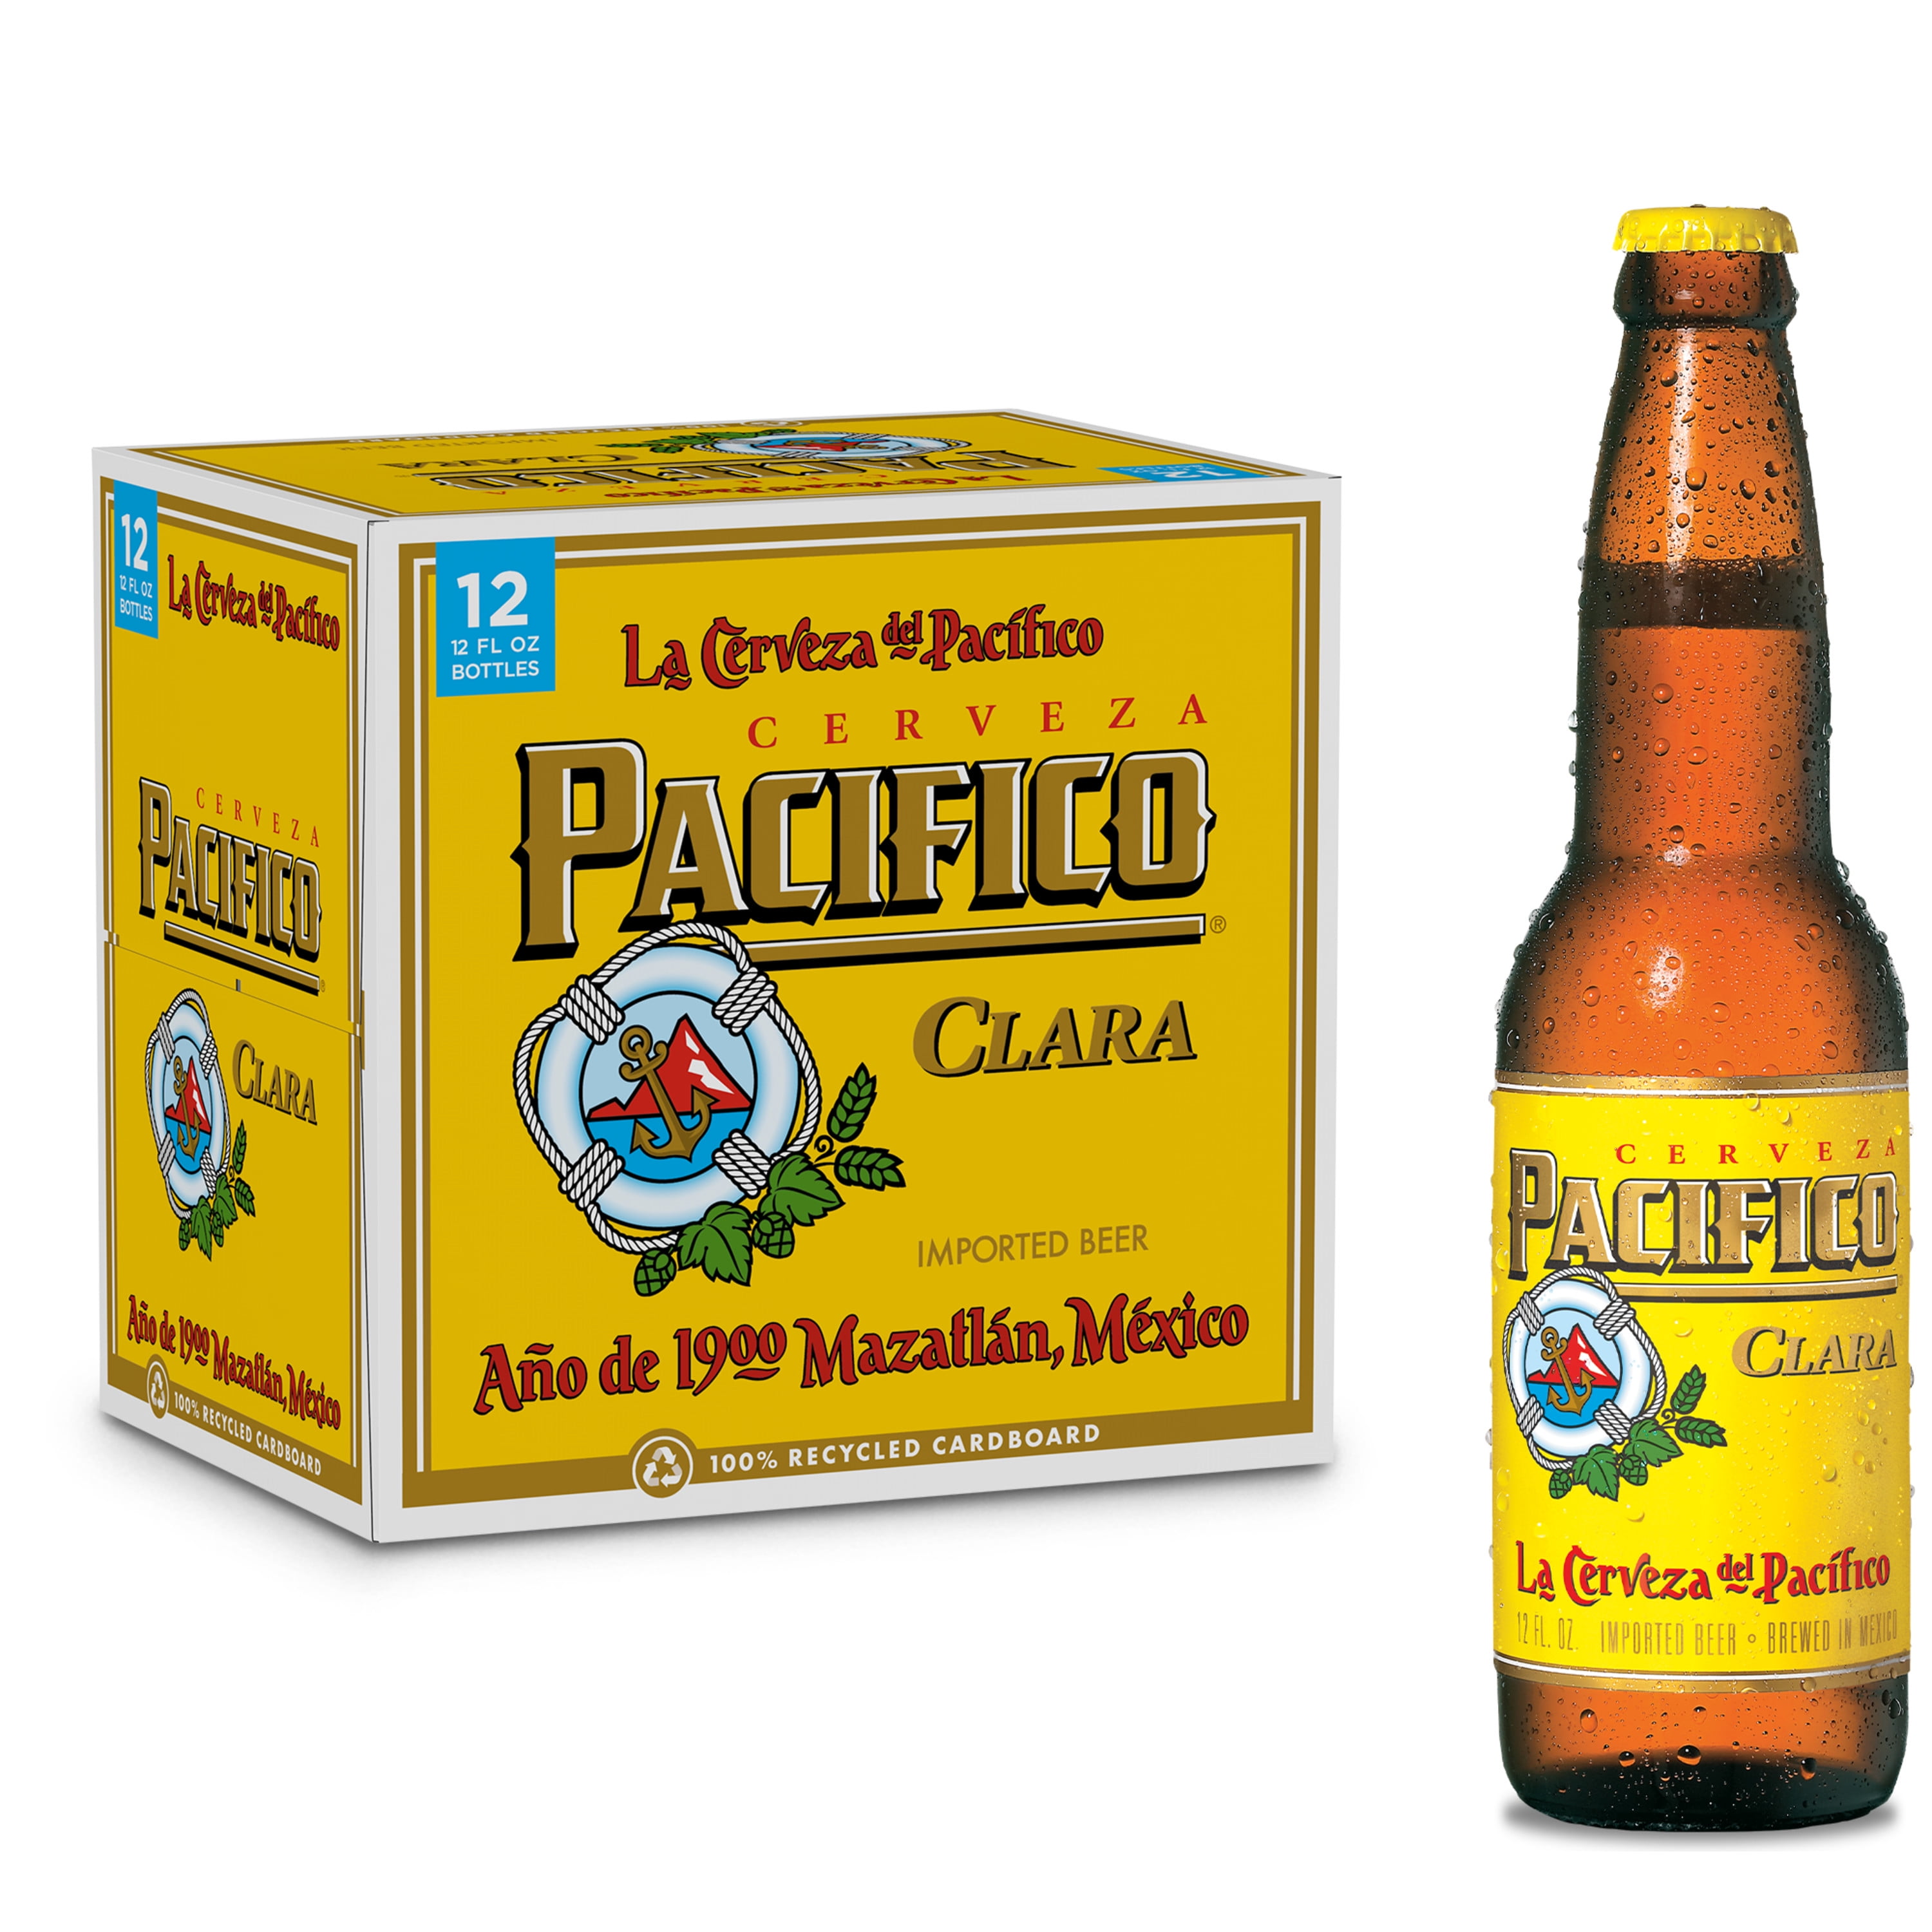 Pacifico Beer Alcohol Content: A Mexican Lager's Strength